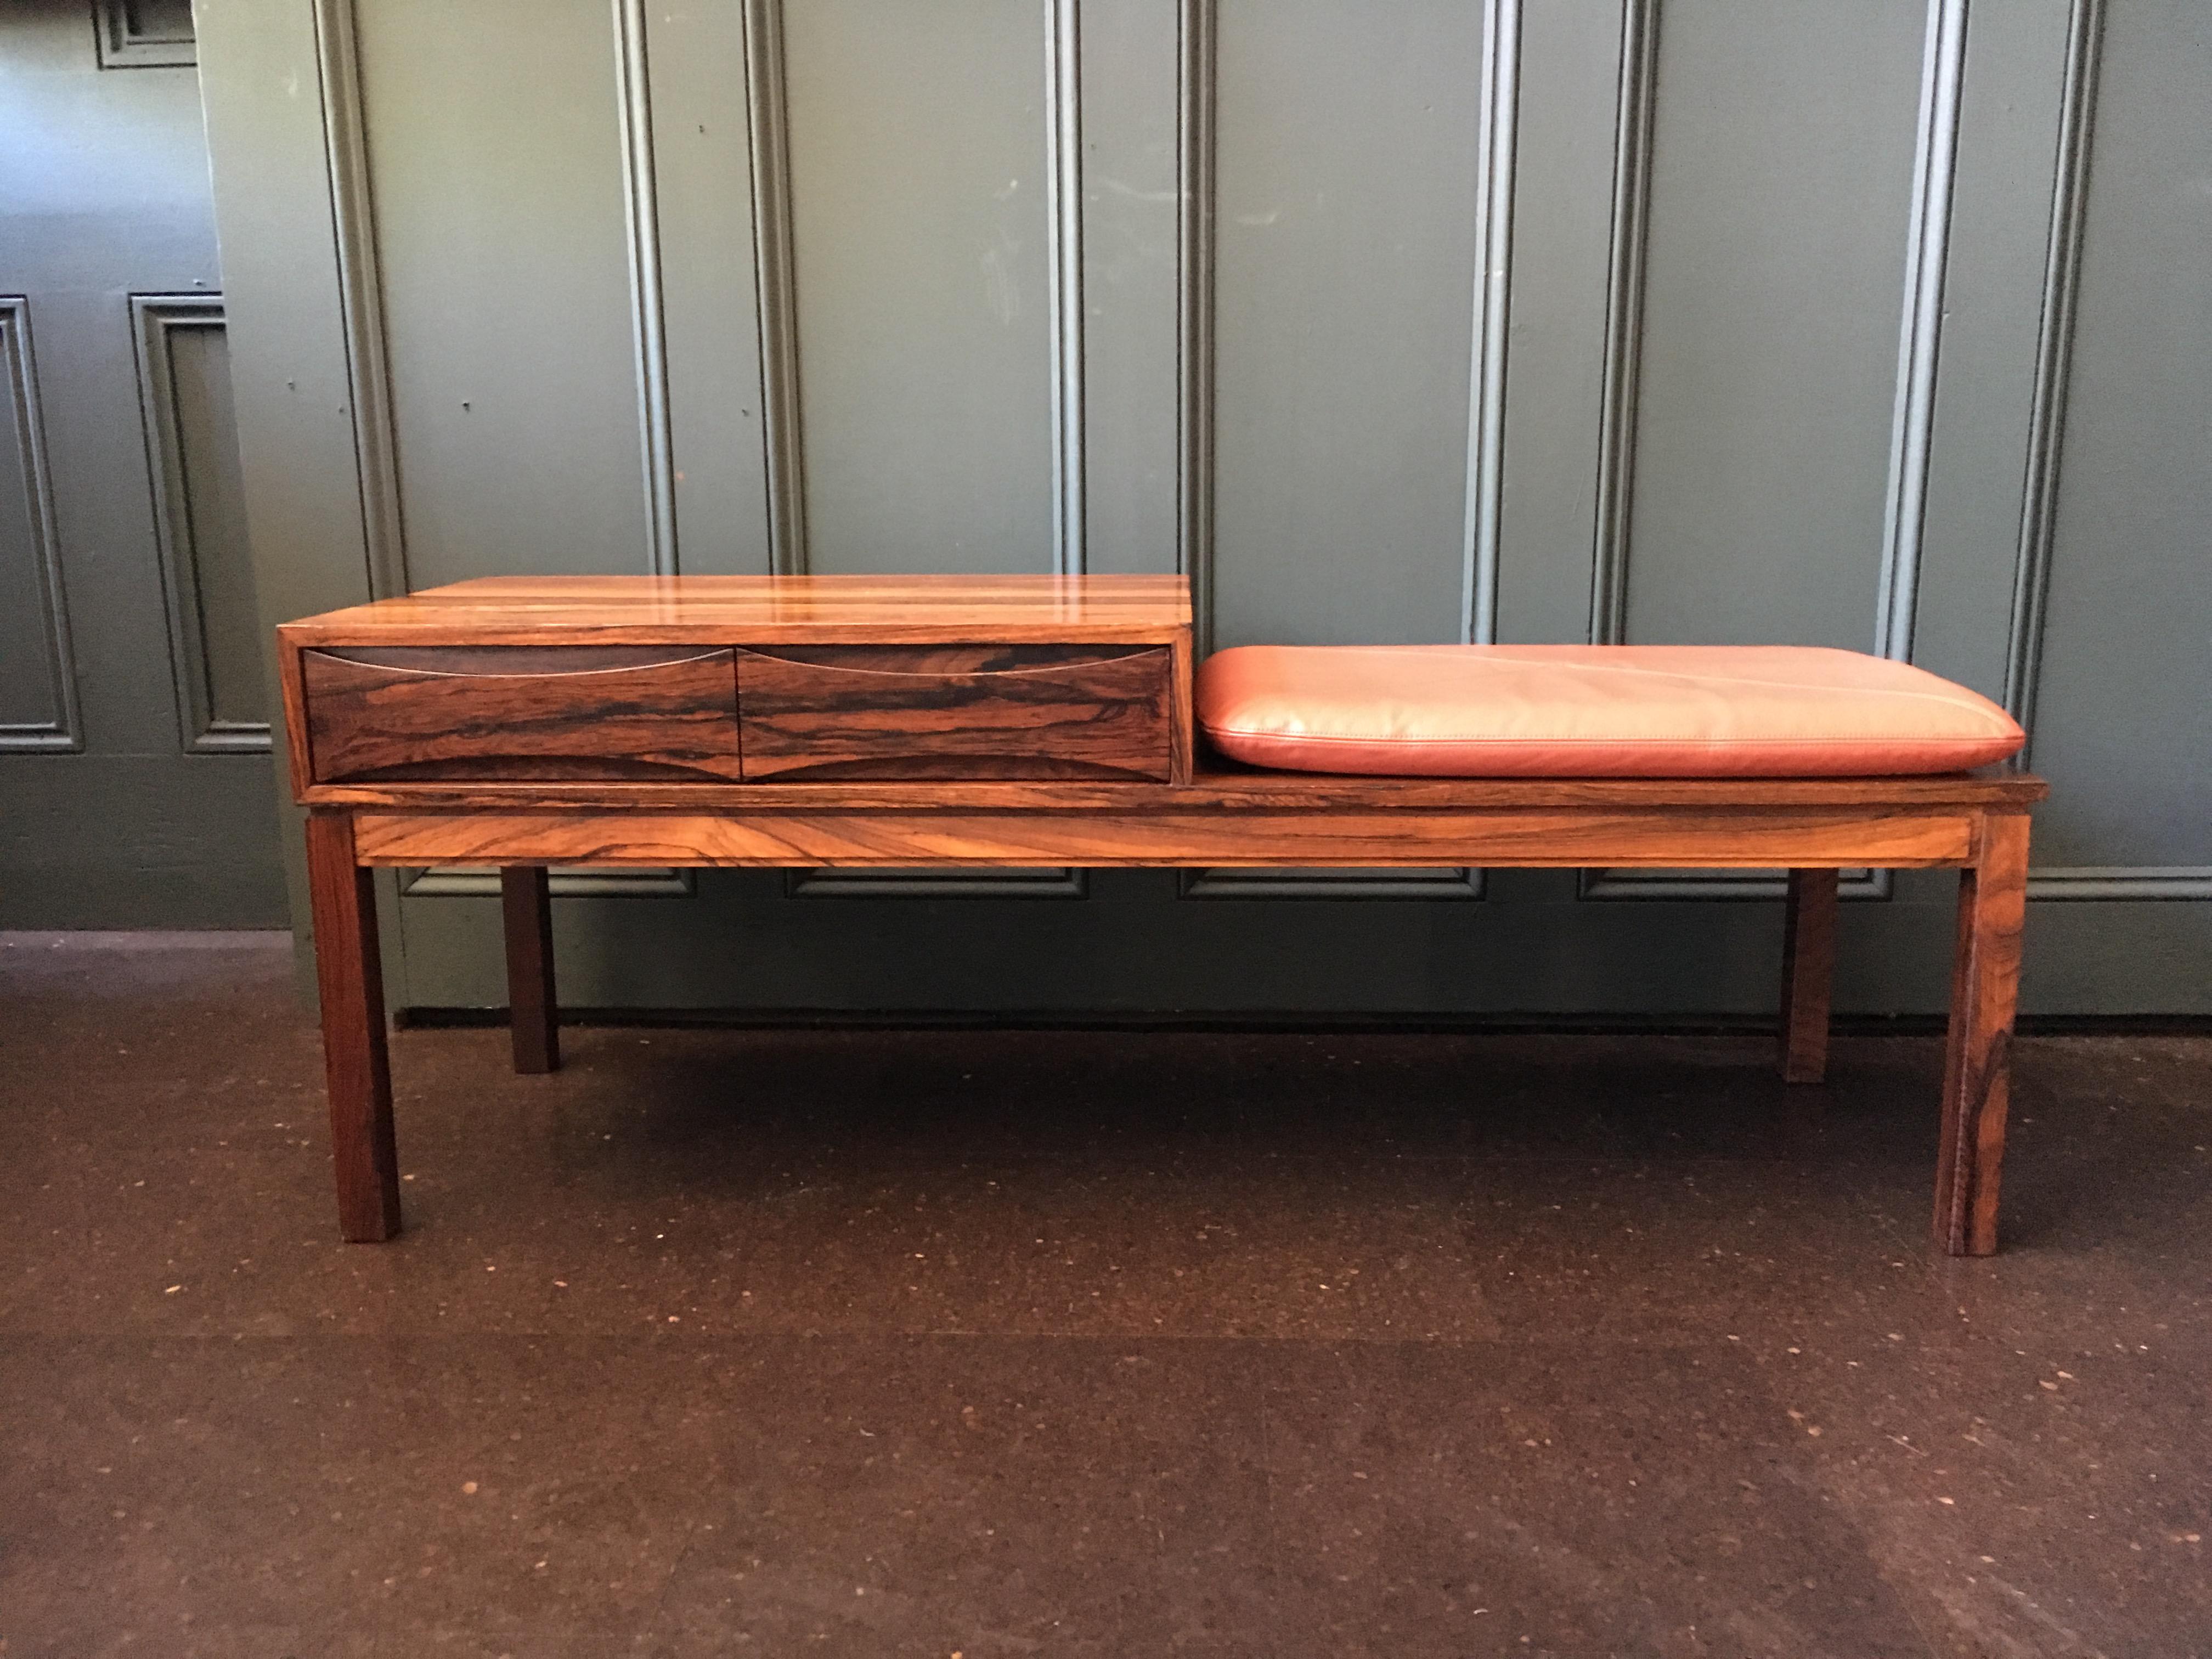 This amazing lowboy piece of midcentury design can be used in a variety of interior applications. A rosewood hall entry unit or bench with drawers. Original leather seat pad. Most likely an Arne Vodder design with his signature bow-tie drawers